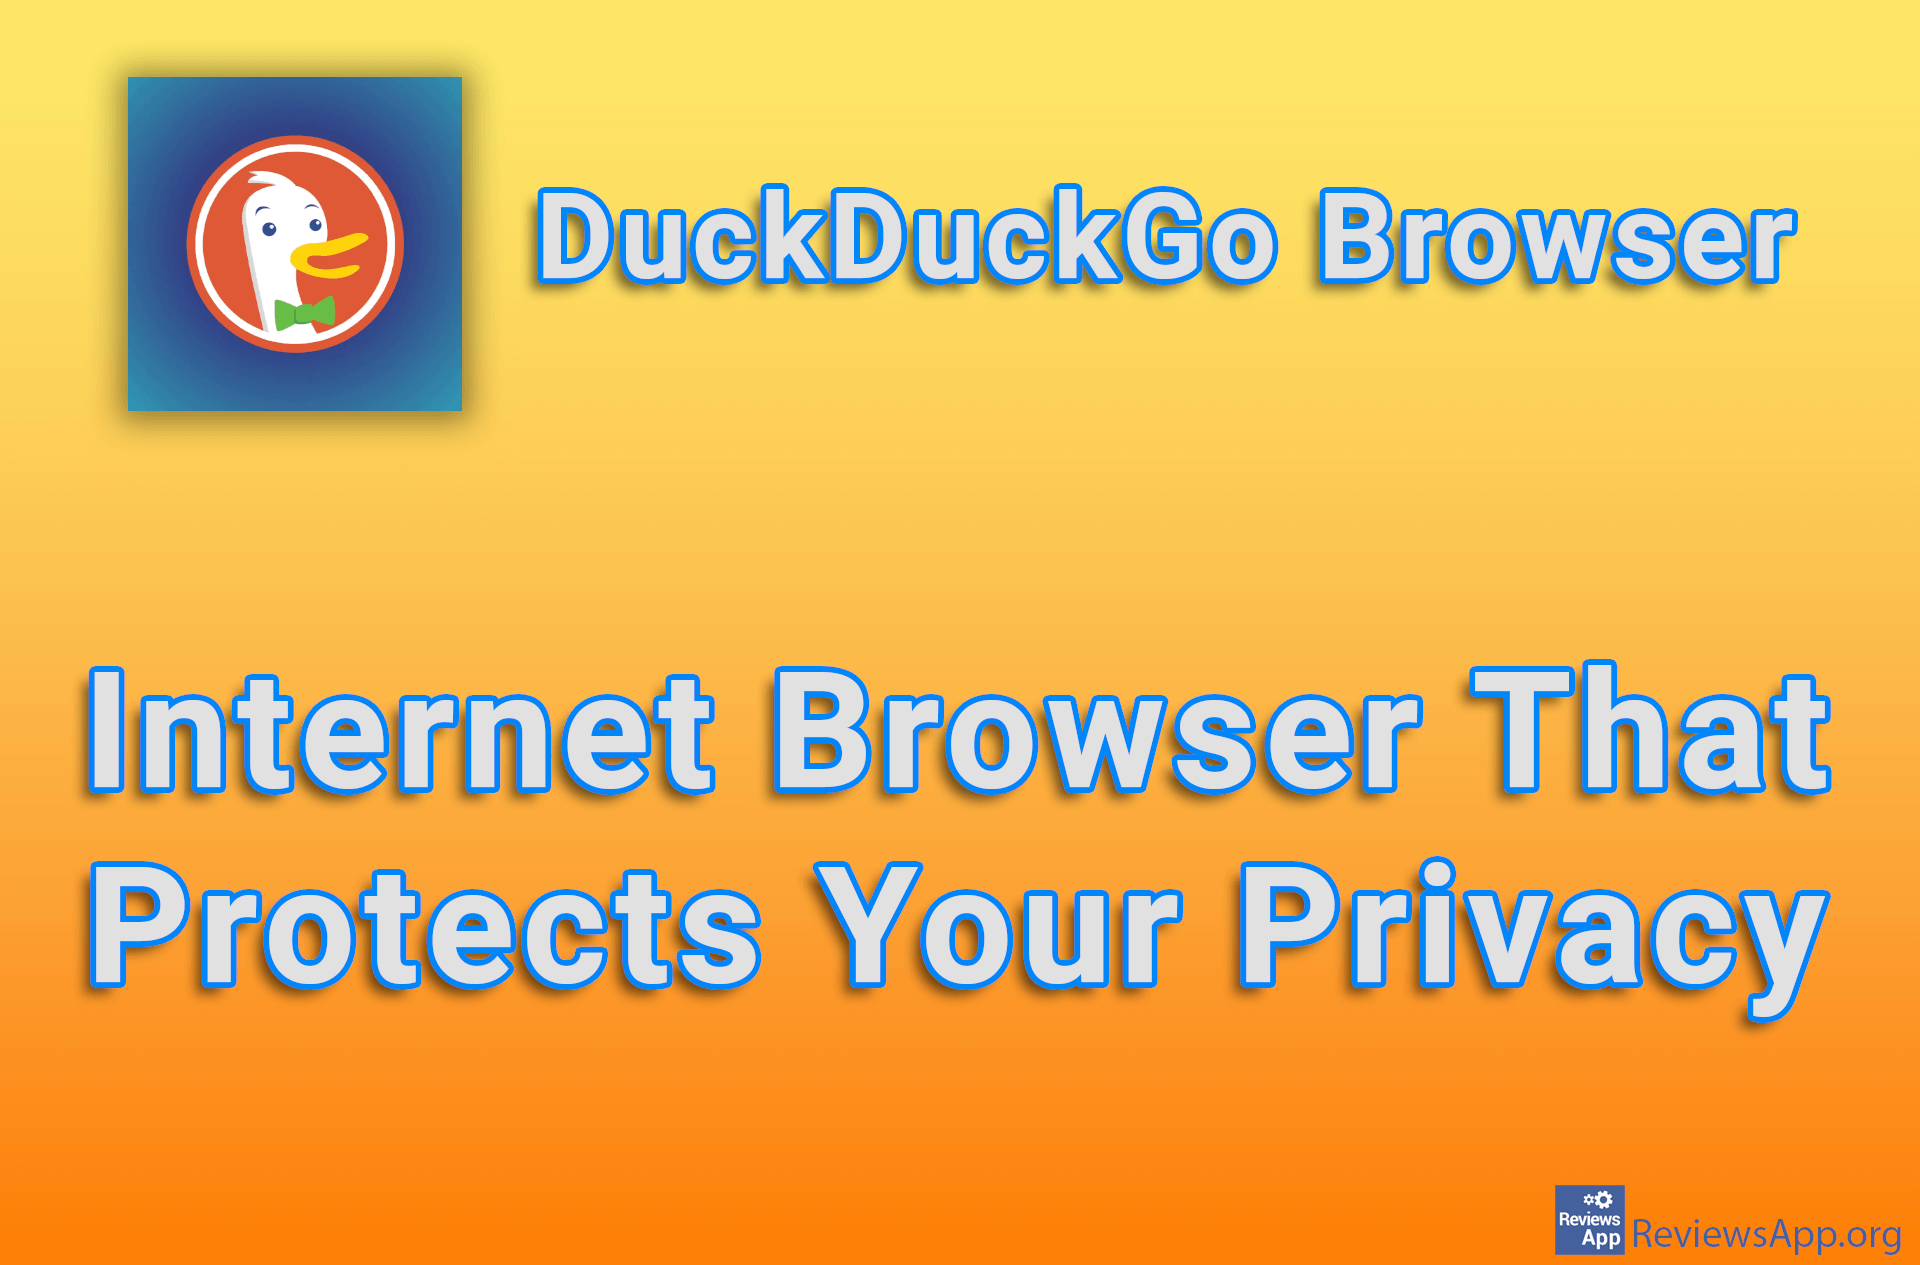 DuckDuckGo Browser – Internet Browser That Protects Your Privacy